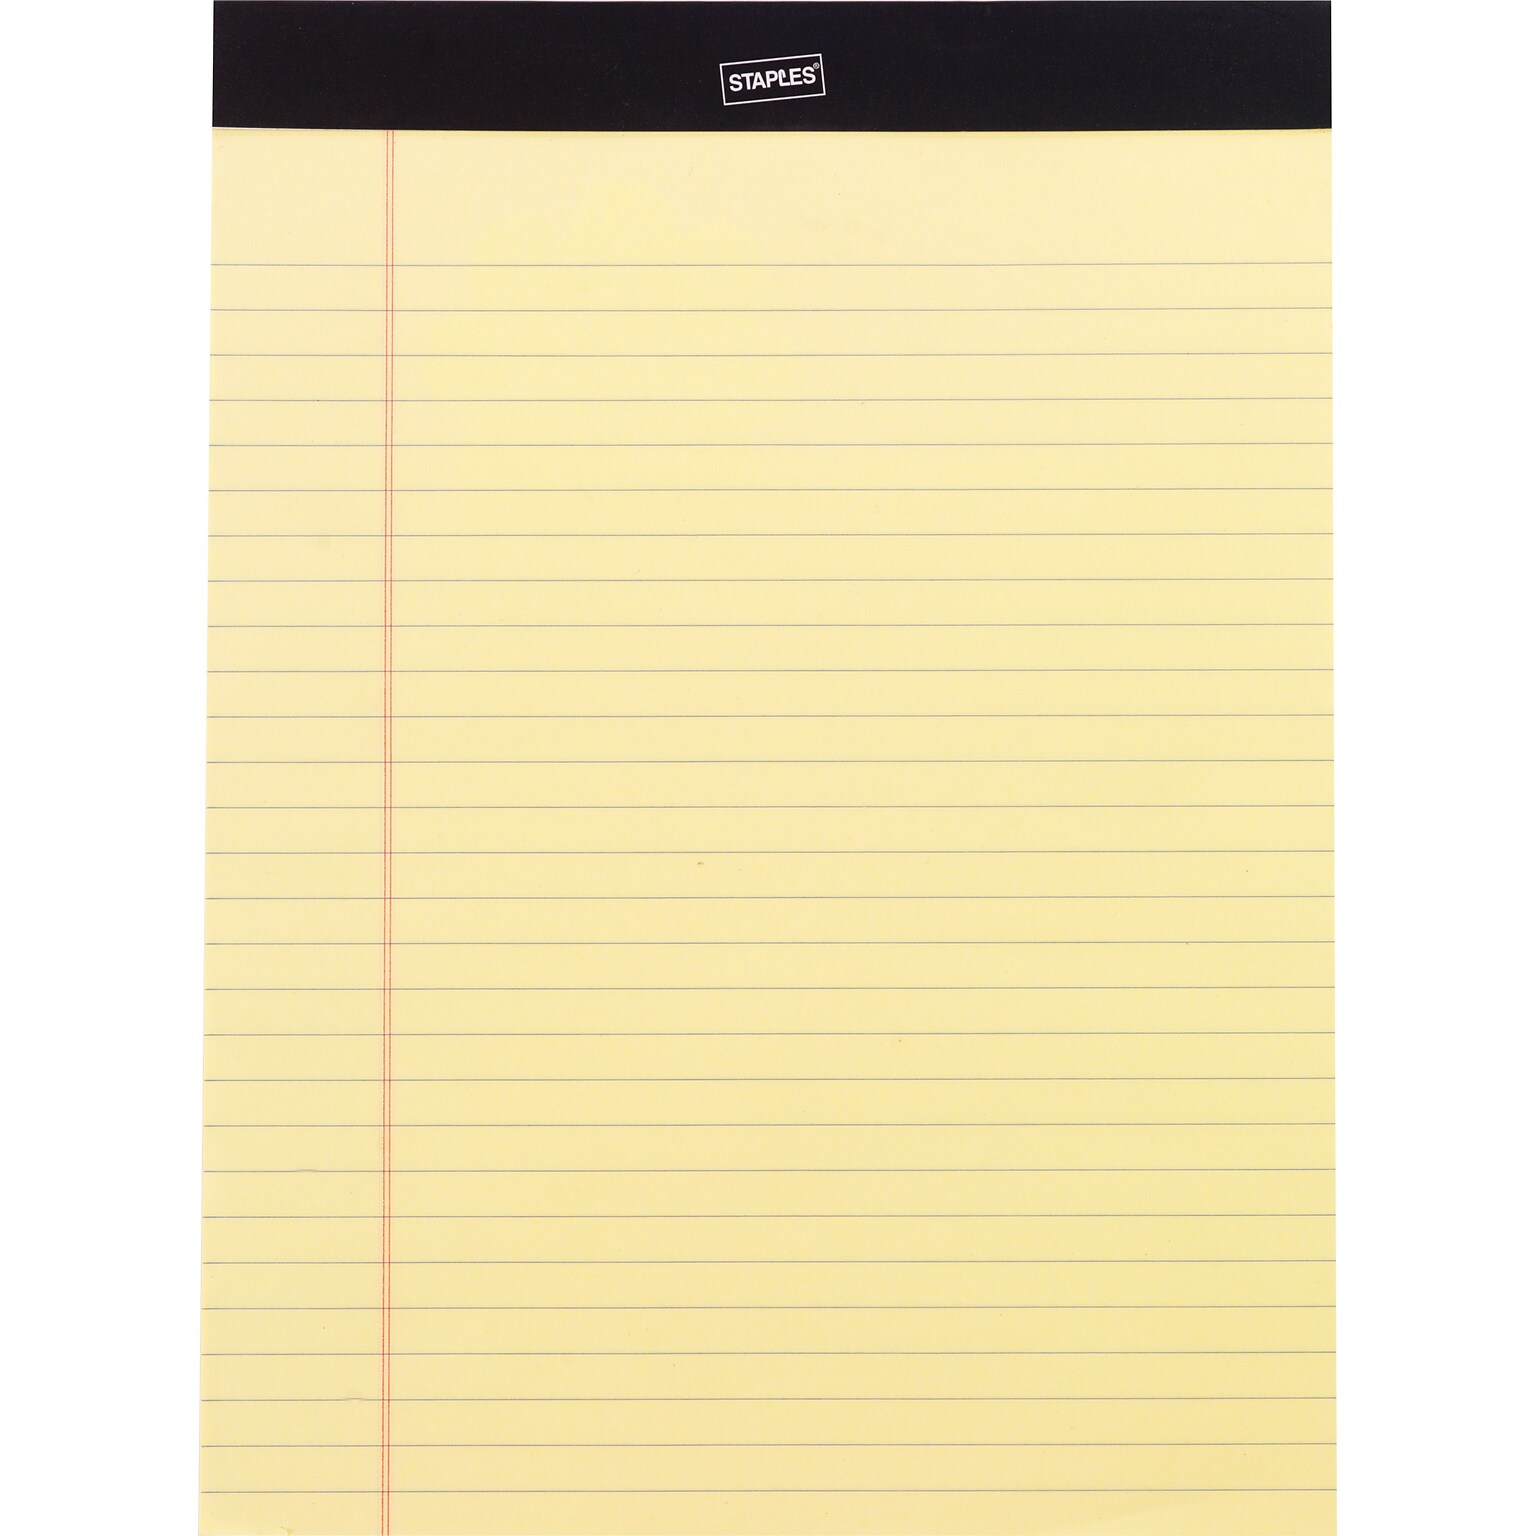 Staples Notepad, 8.5 x 11.75, Wide Ruled, Canary, 50 Sheets/Pad, Dozen Pads/Pack (ST57300)